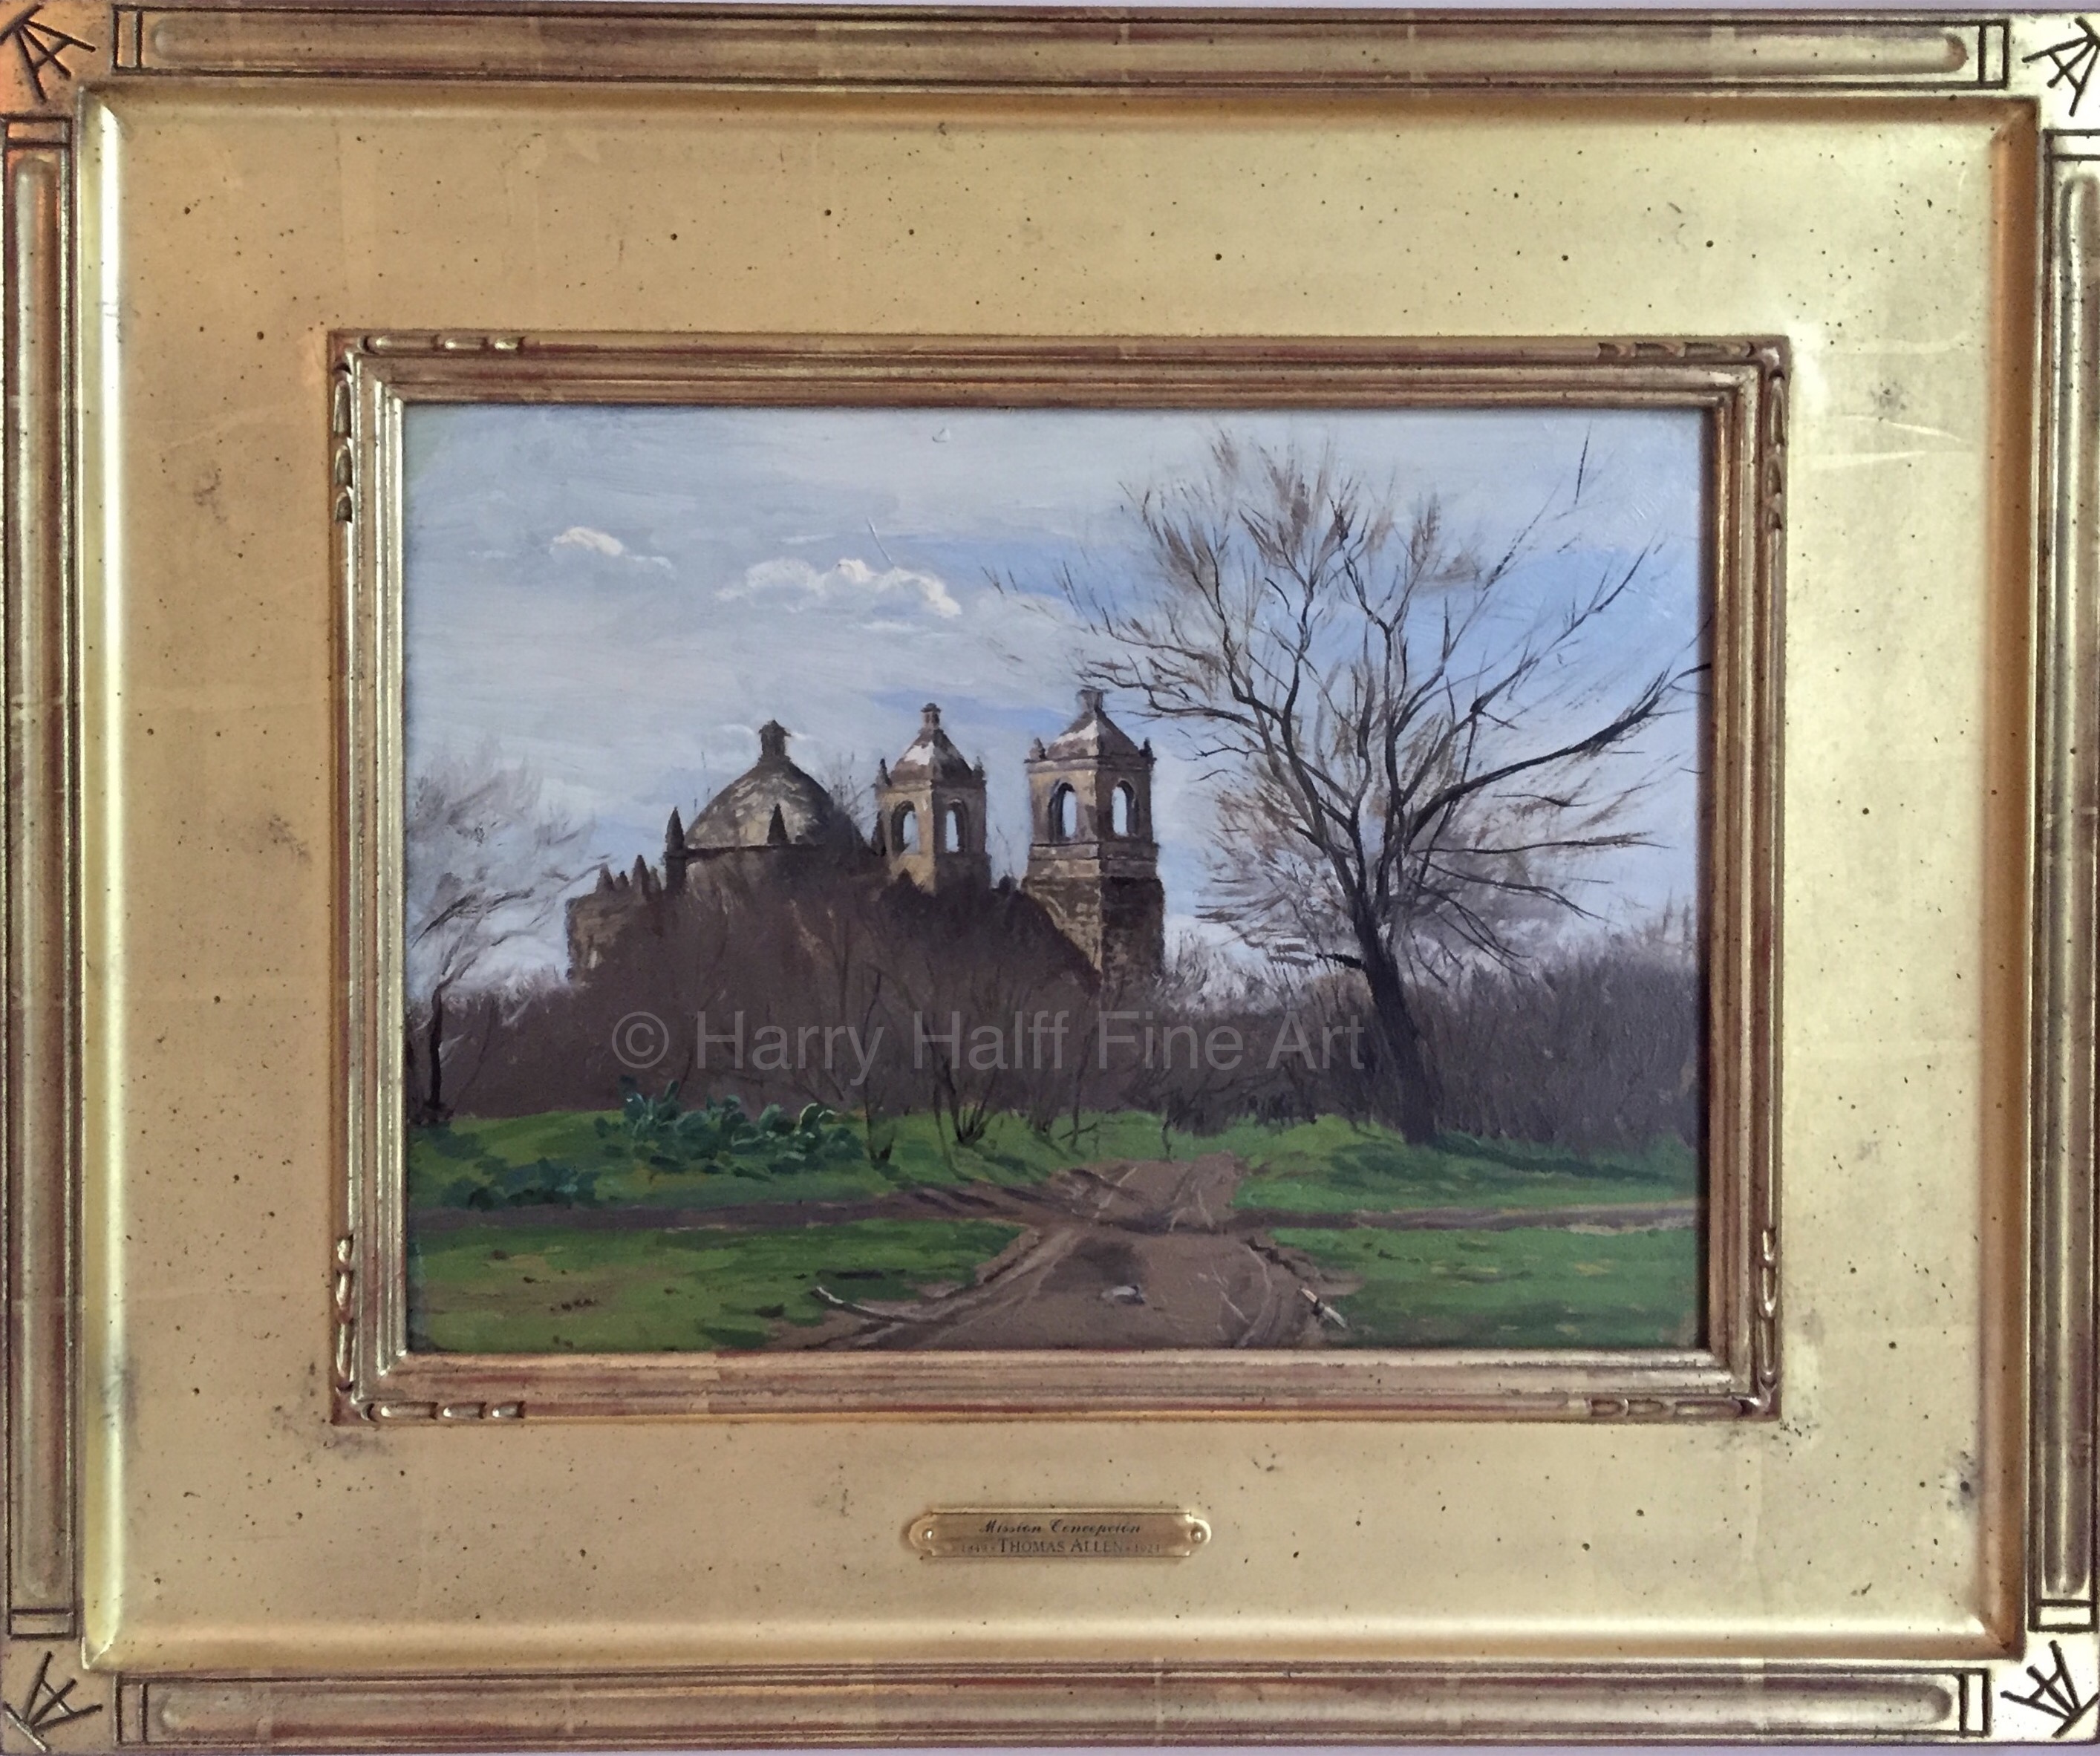 Thomas Allen's painting of Mission Concepcion in San Antonio, Texas from 1879.